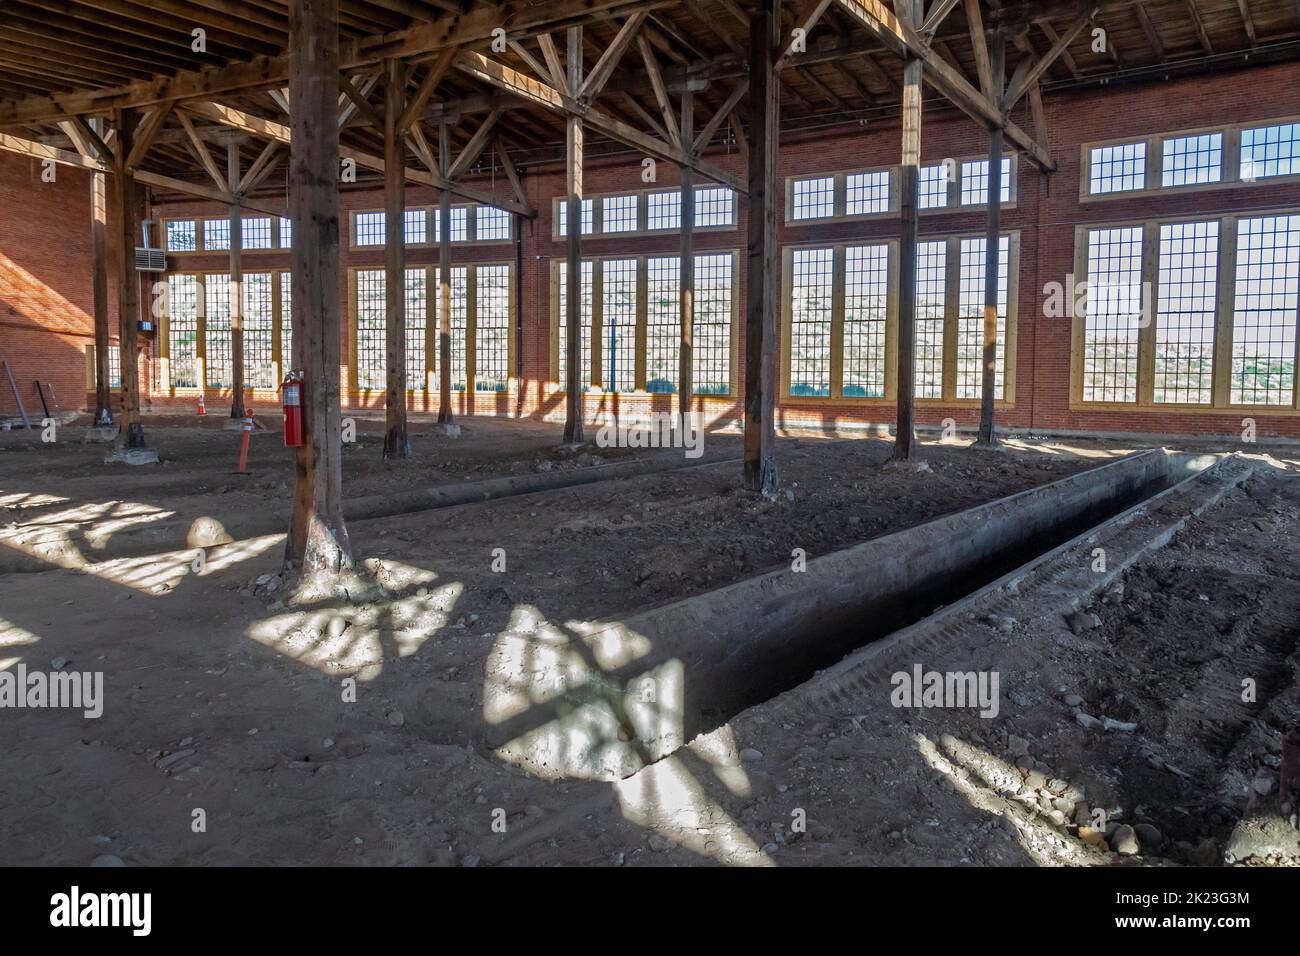 Evanston, Wyoming - The historic roundhouse and railyards, built by the Union Pacific Railroad in 1912. The building had 28 bays for railcar and locom Stock Photo